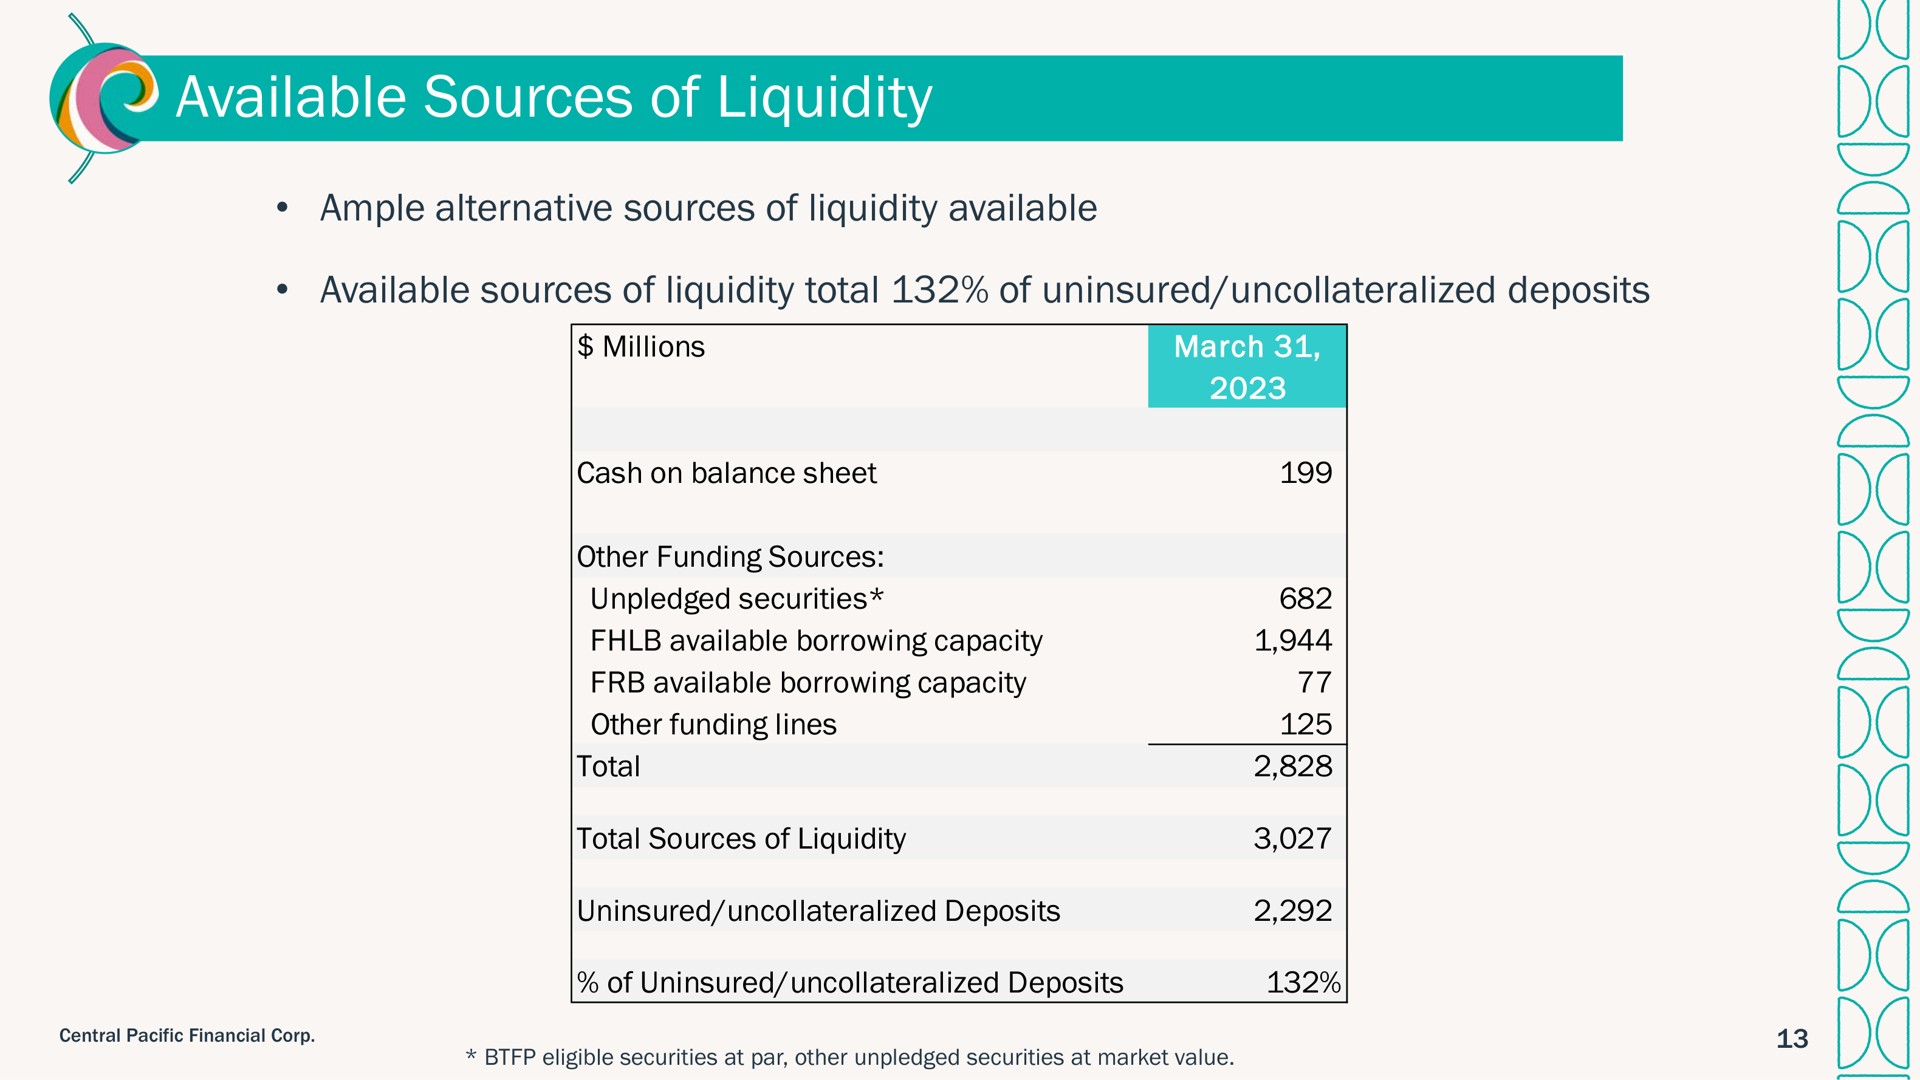 available sources of liquidity | Central Pacific Financial